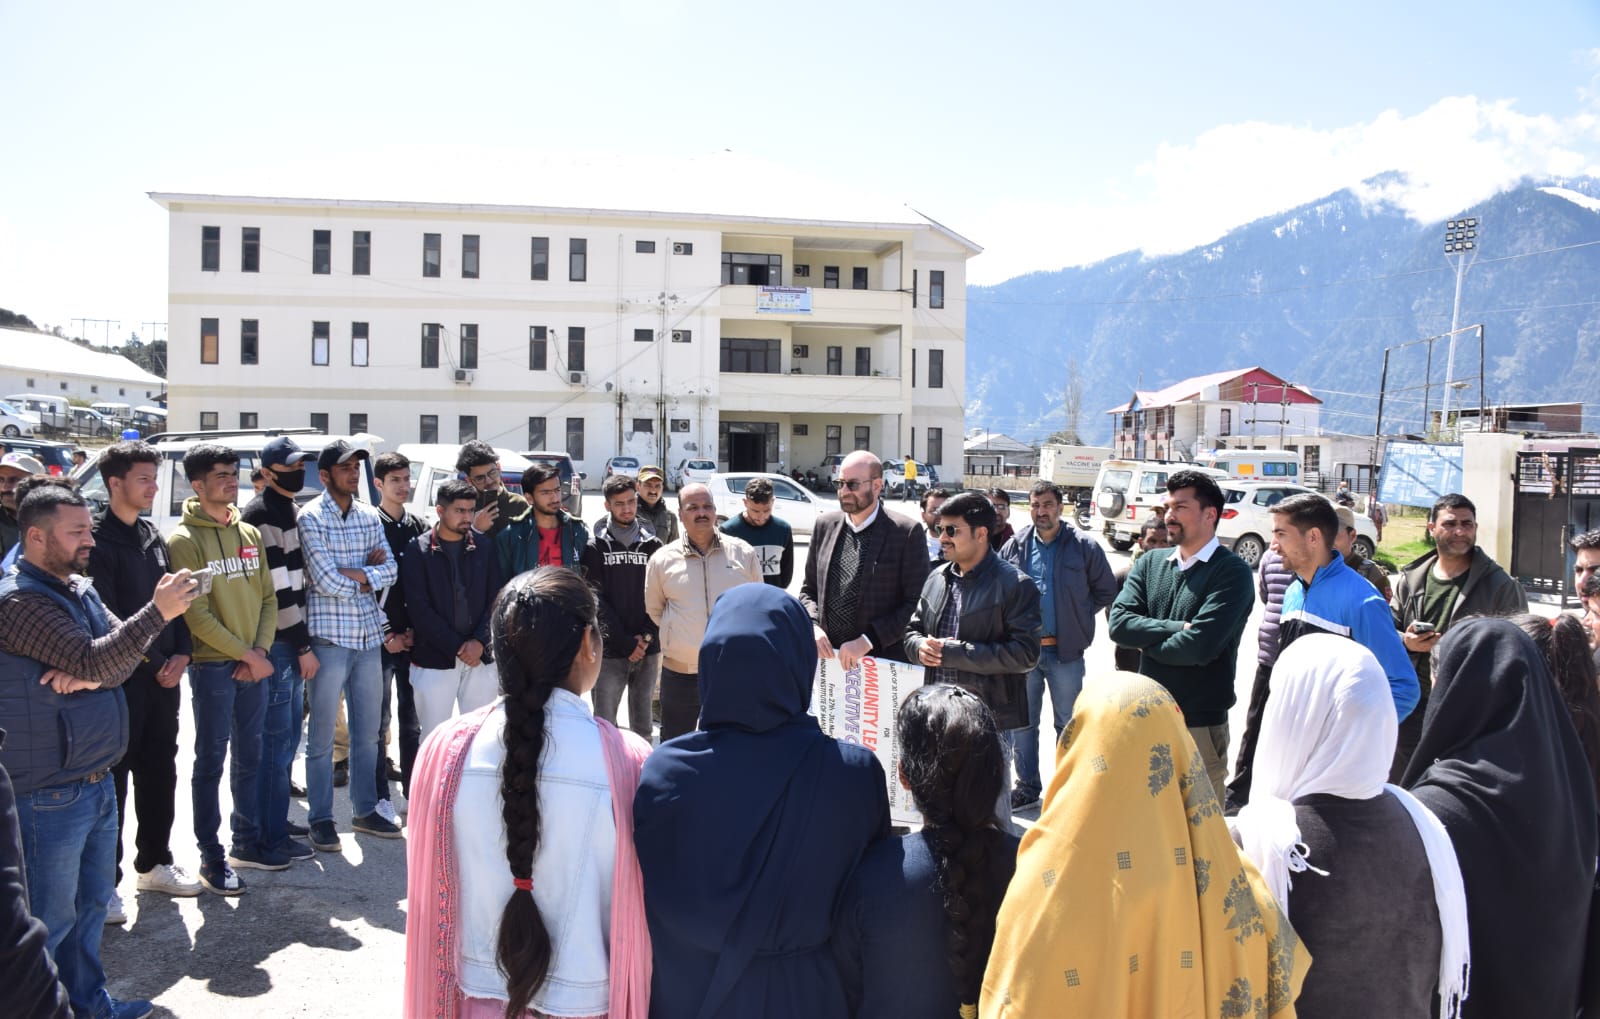 You are currently viewing IIM Jammu as part of its CSR Initiative to organize a “Community Leadership Executive Course” for the People and Community of Jammu and Kashmir